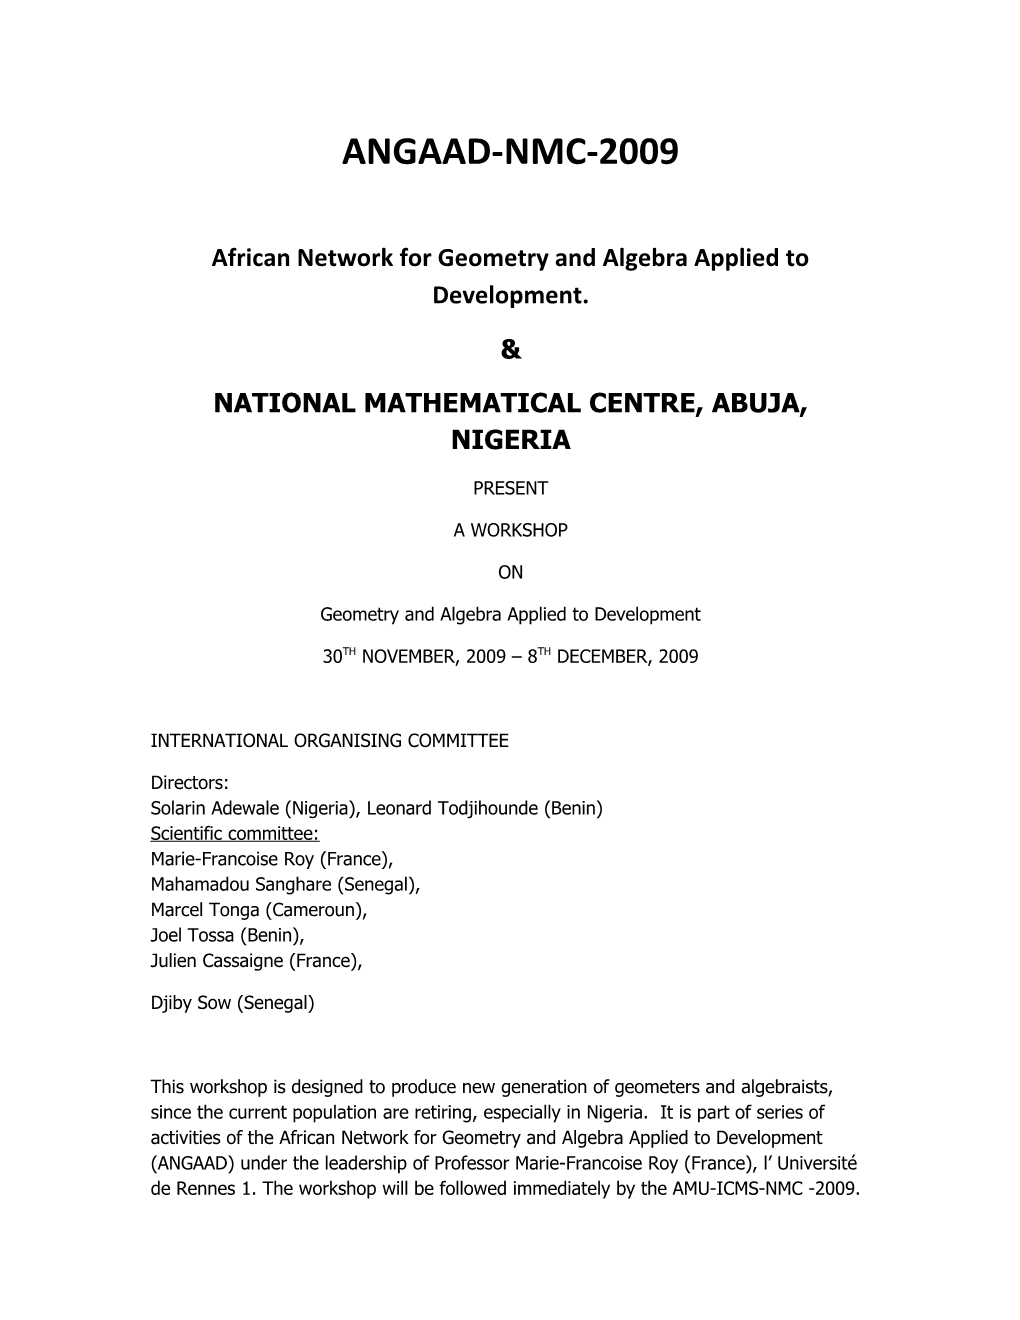 African Network for Geometry and Algebra Applied to Development